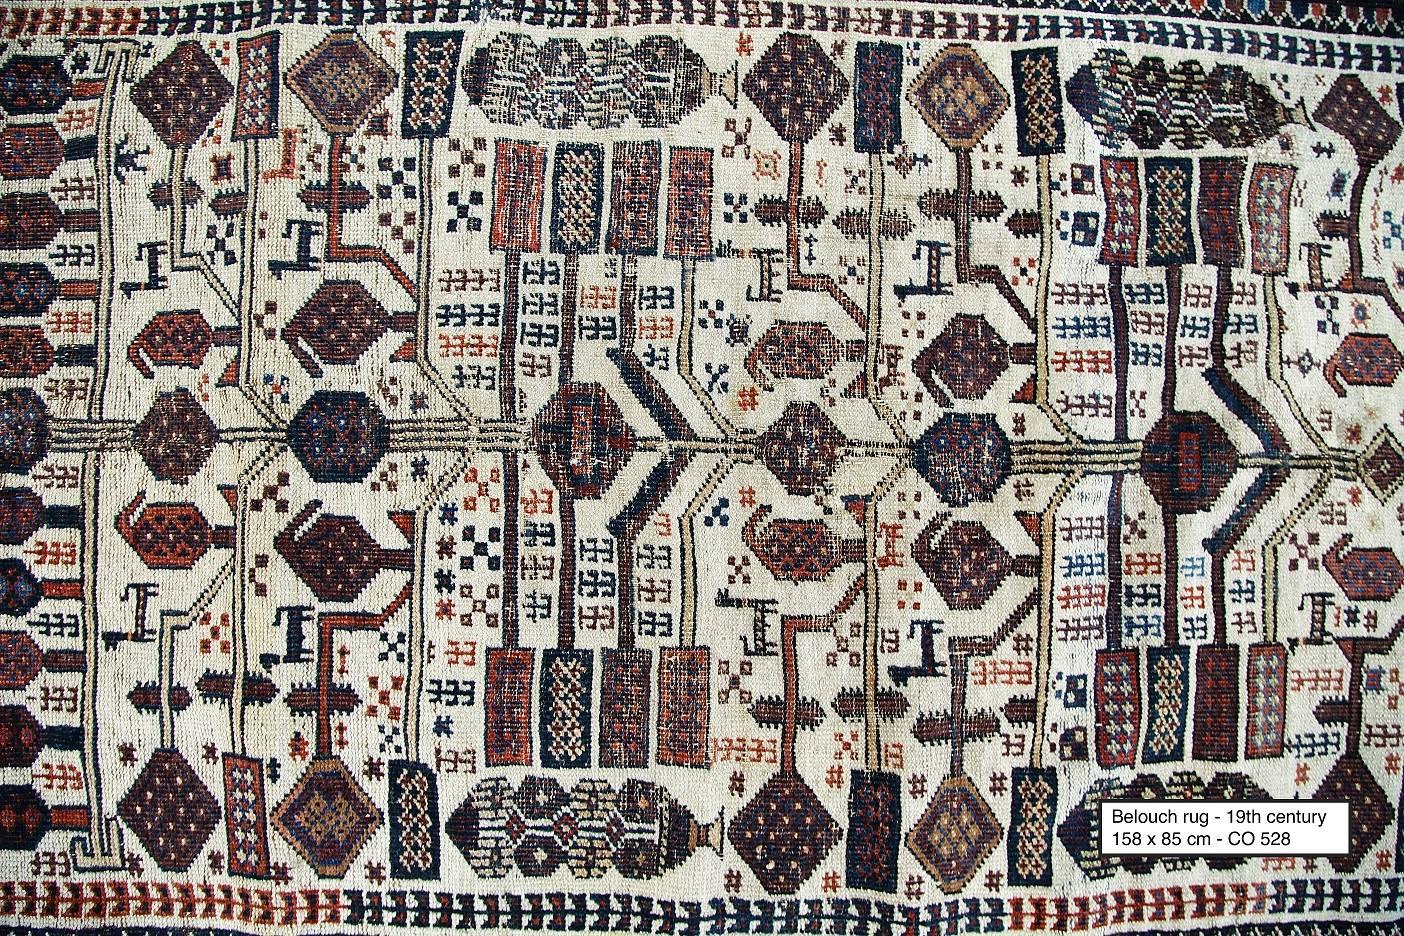 Baluch rugs were handwoven by Nomadic tribes of Baluchistan. They would hand spin their lustrous thick wools from sheep, camel and goat and dye them using primarily the vegetal or mineral dyes available to them. These rugs would take months to weave